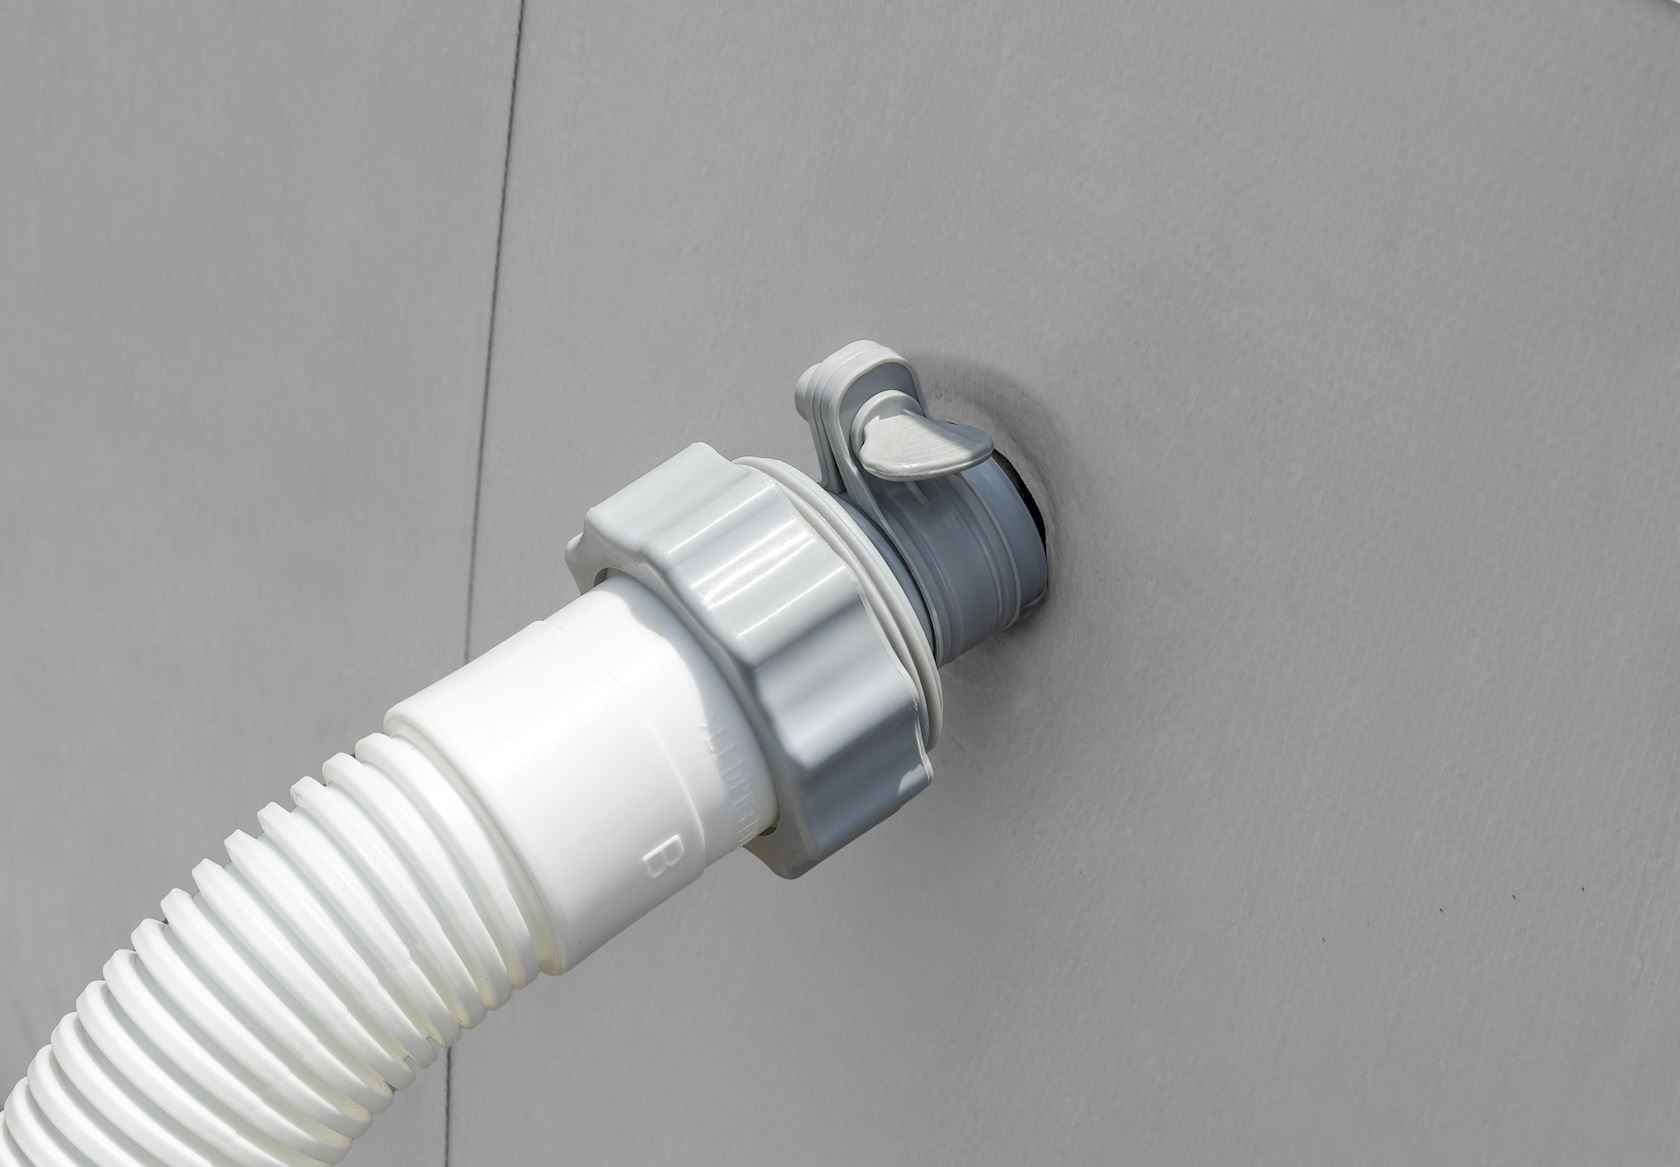 Intex Hose Adapter B - effortlessly connects a 38 mm hose to a 32 mm connection